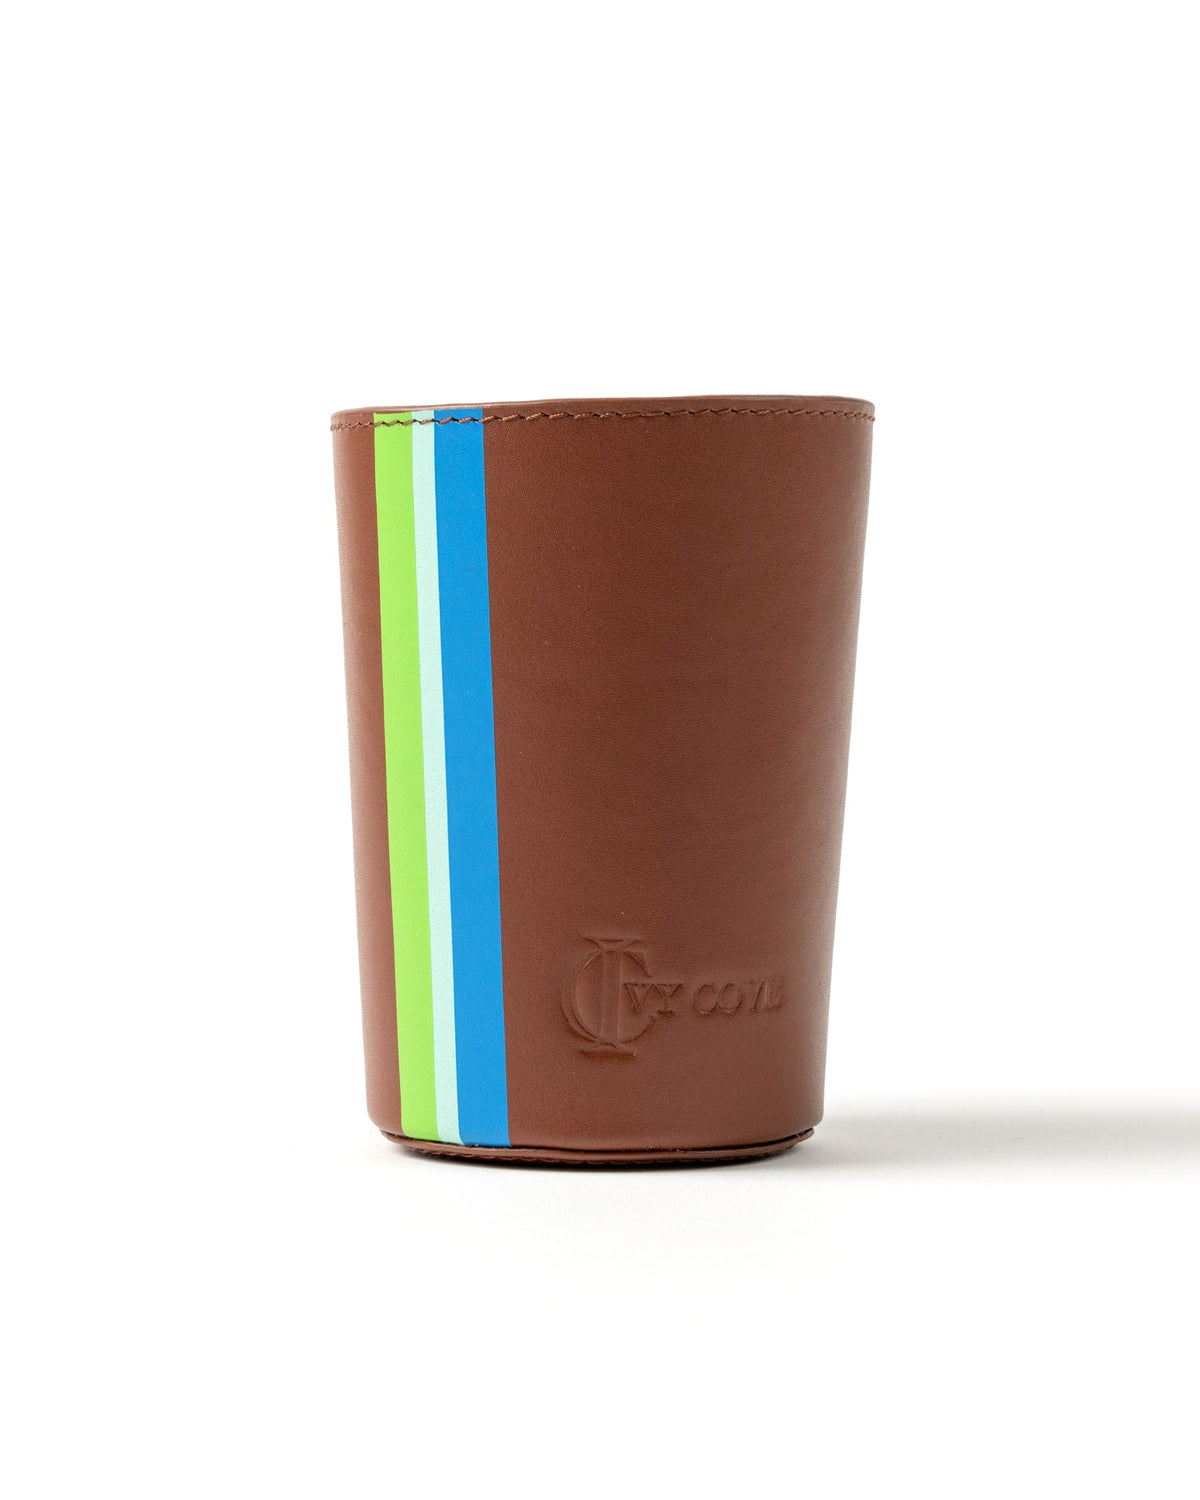 Madison Leather Drink Coozies - Ivy Cove Montecito